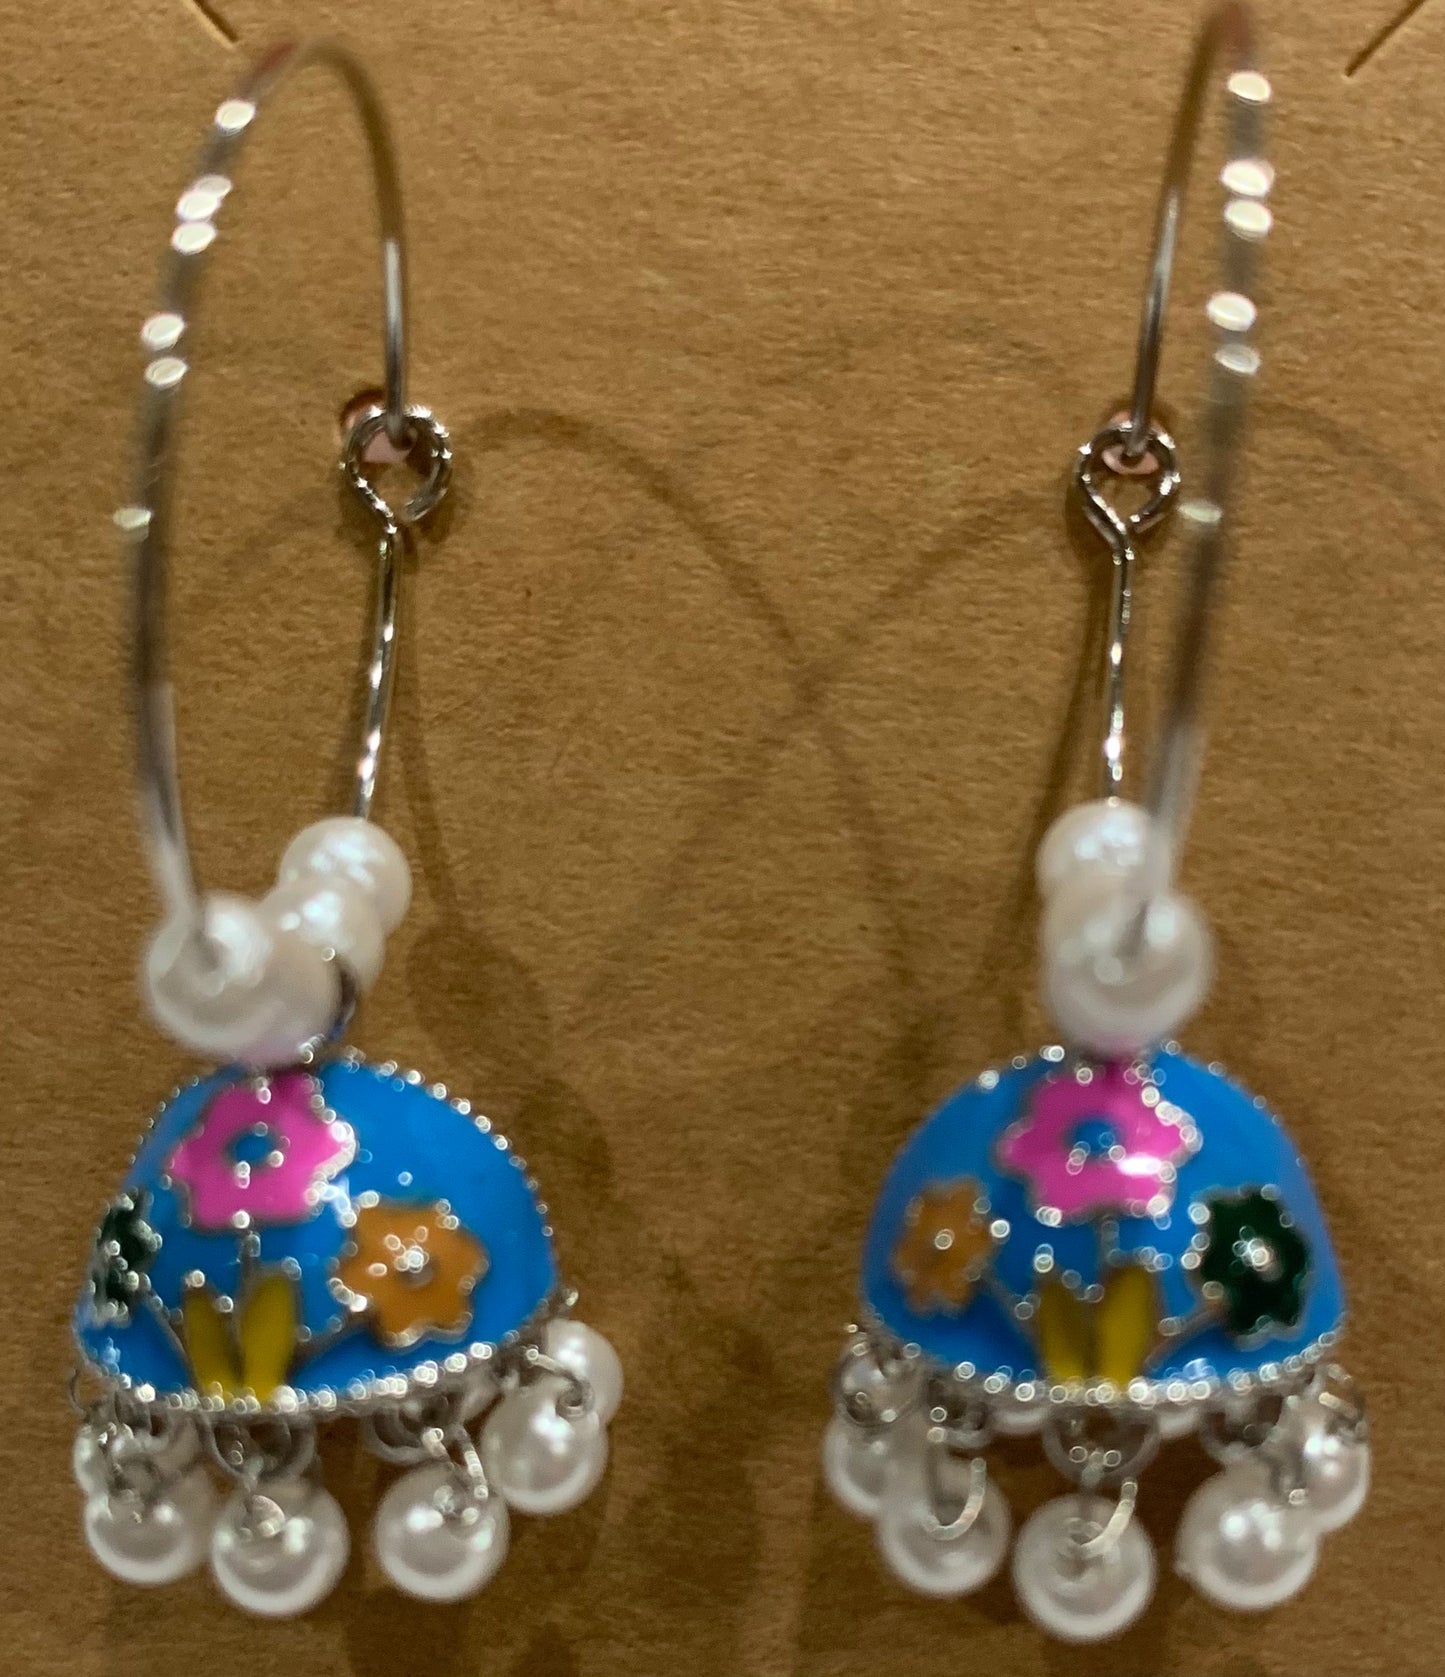 Hand painted hoop earring with beads